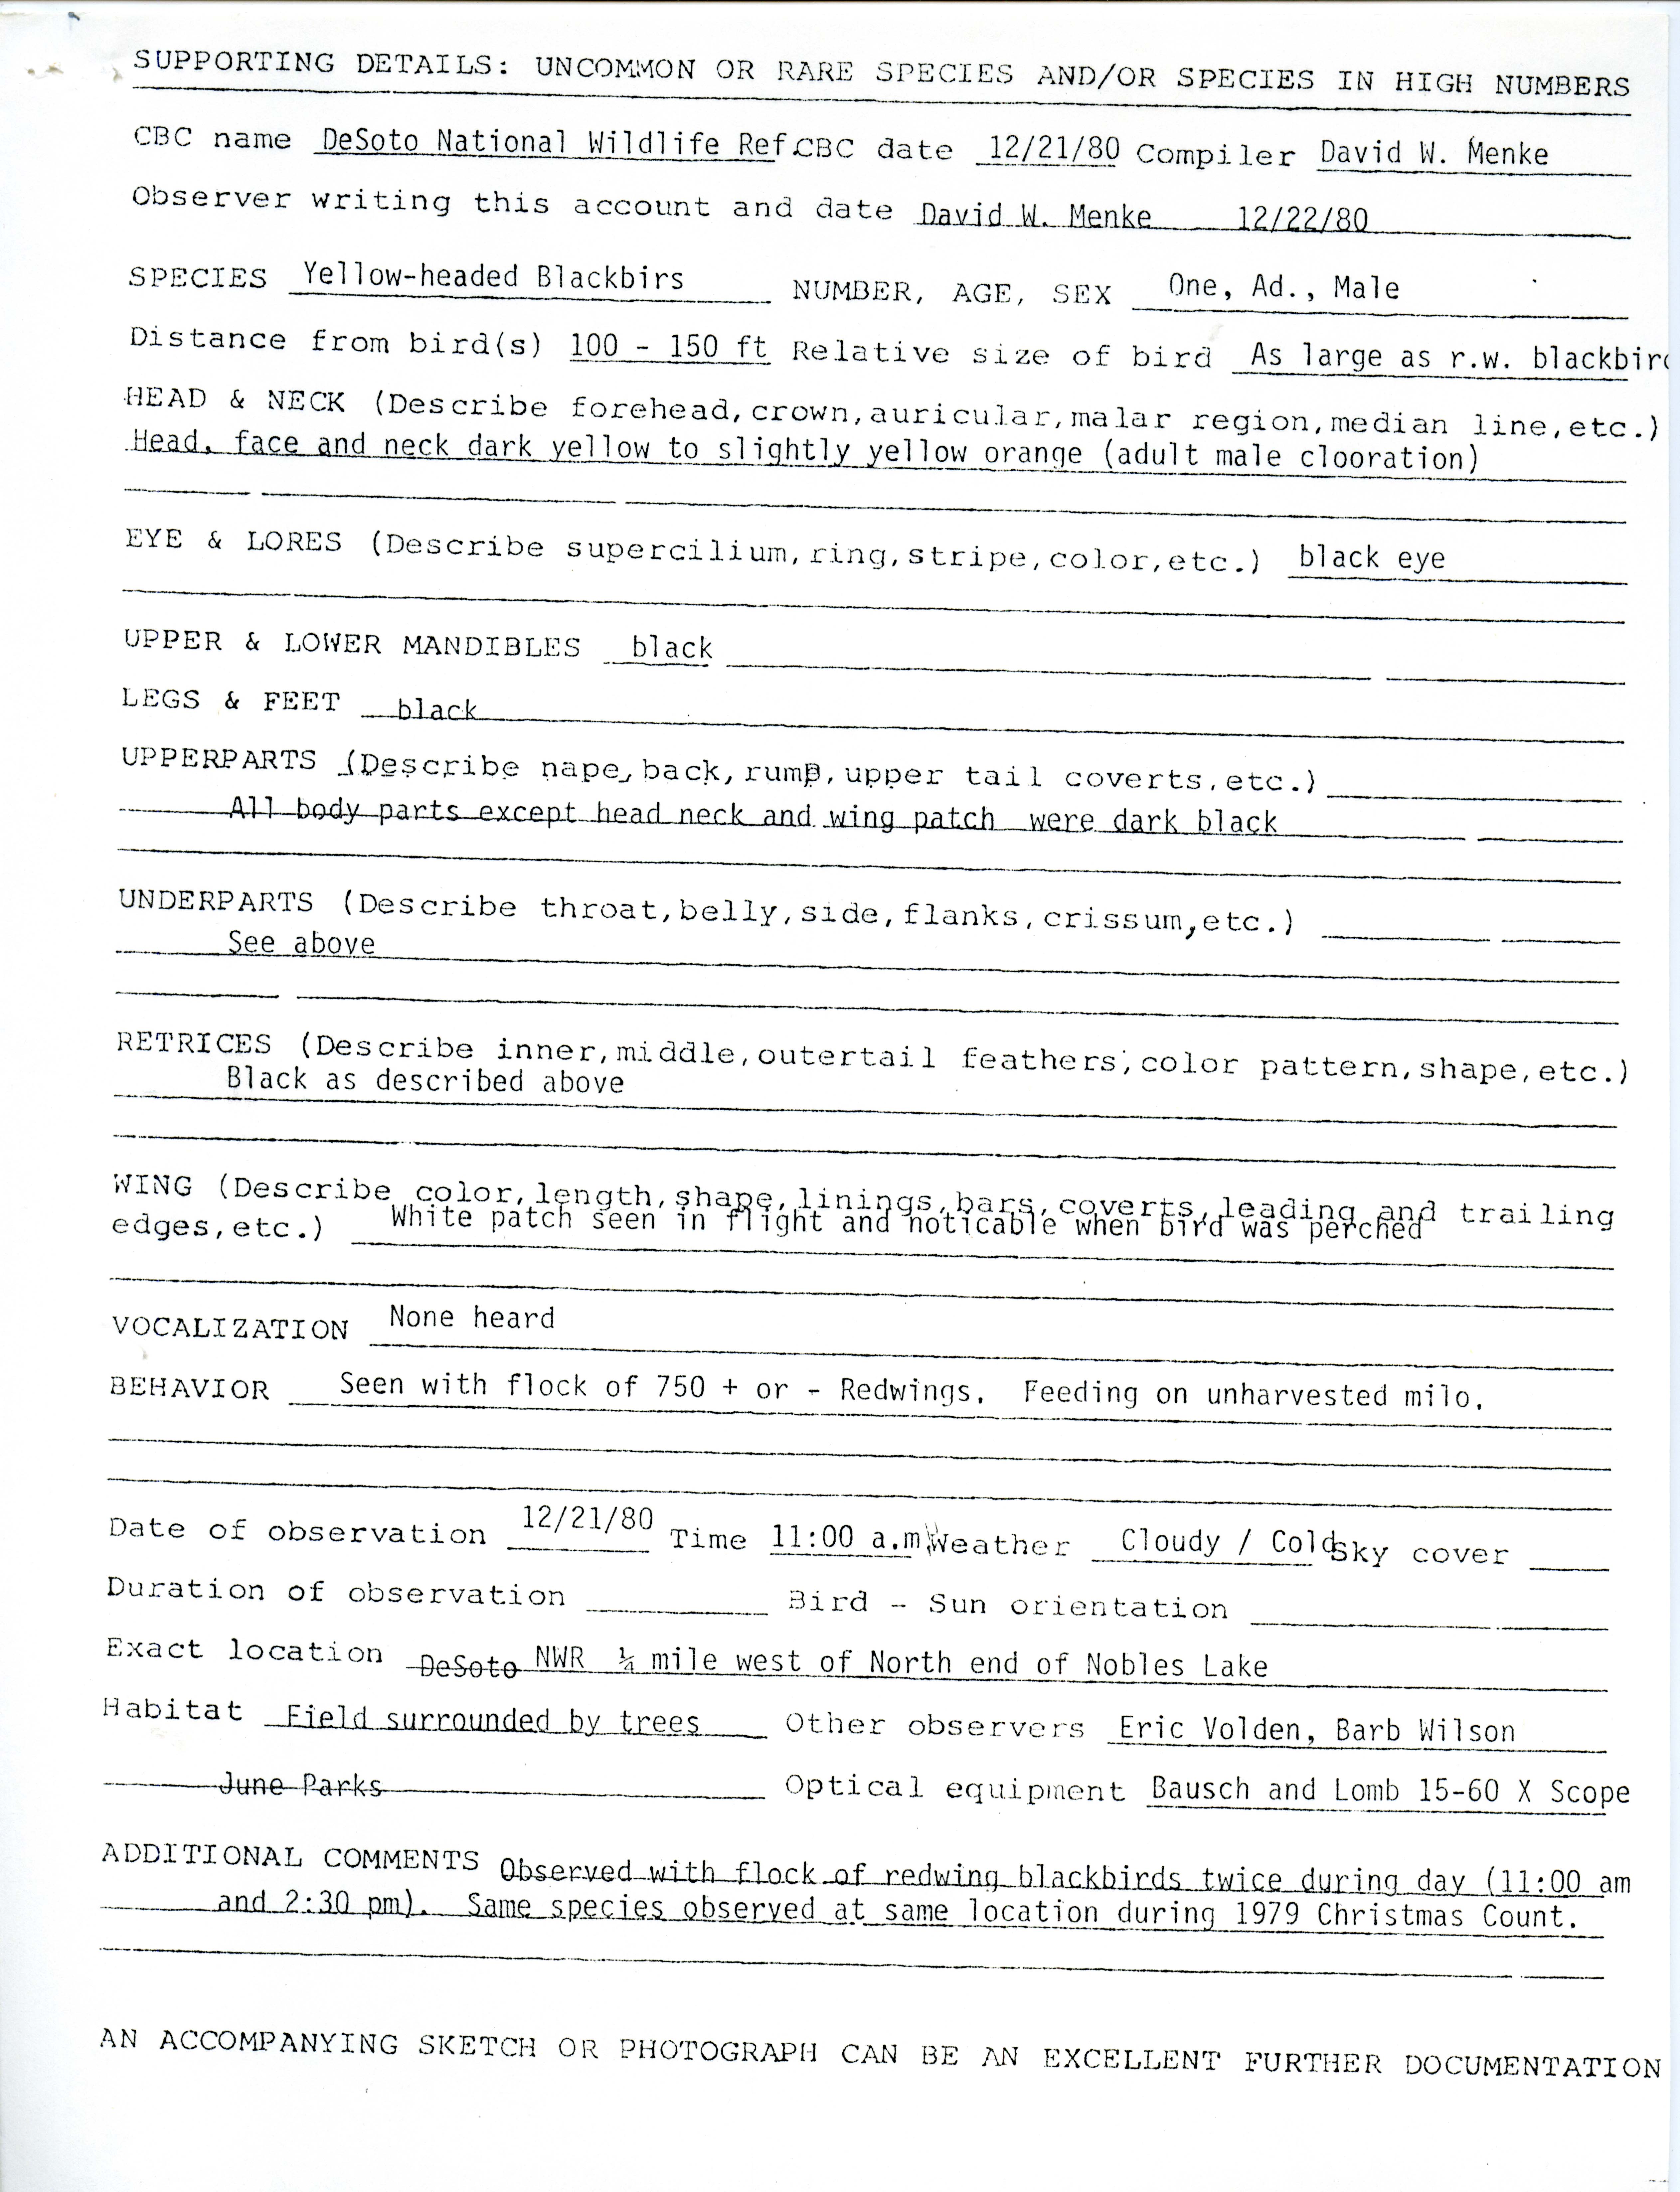 Supporting details form for Yellow-headed Blackbird sighting submitted by David W. Menke, December 21 1980